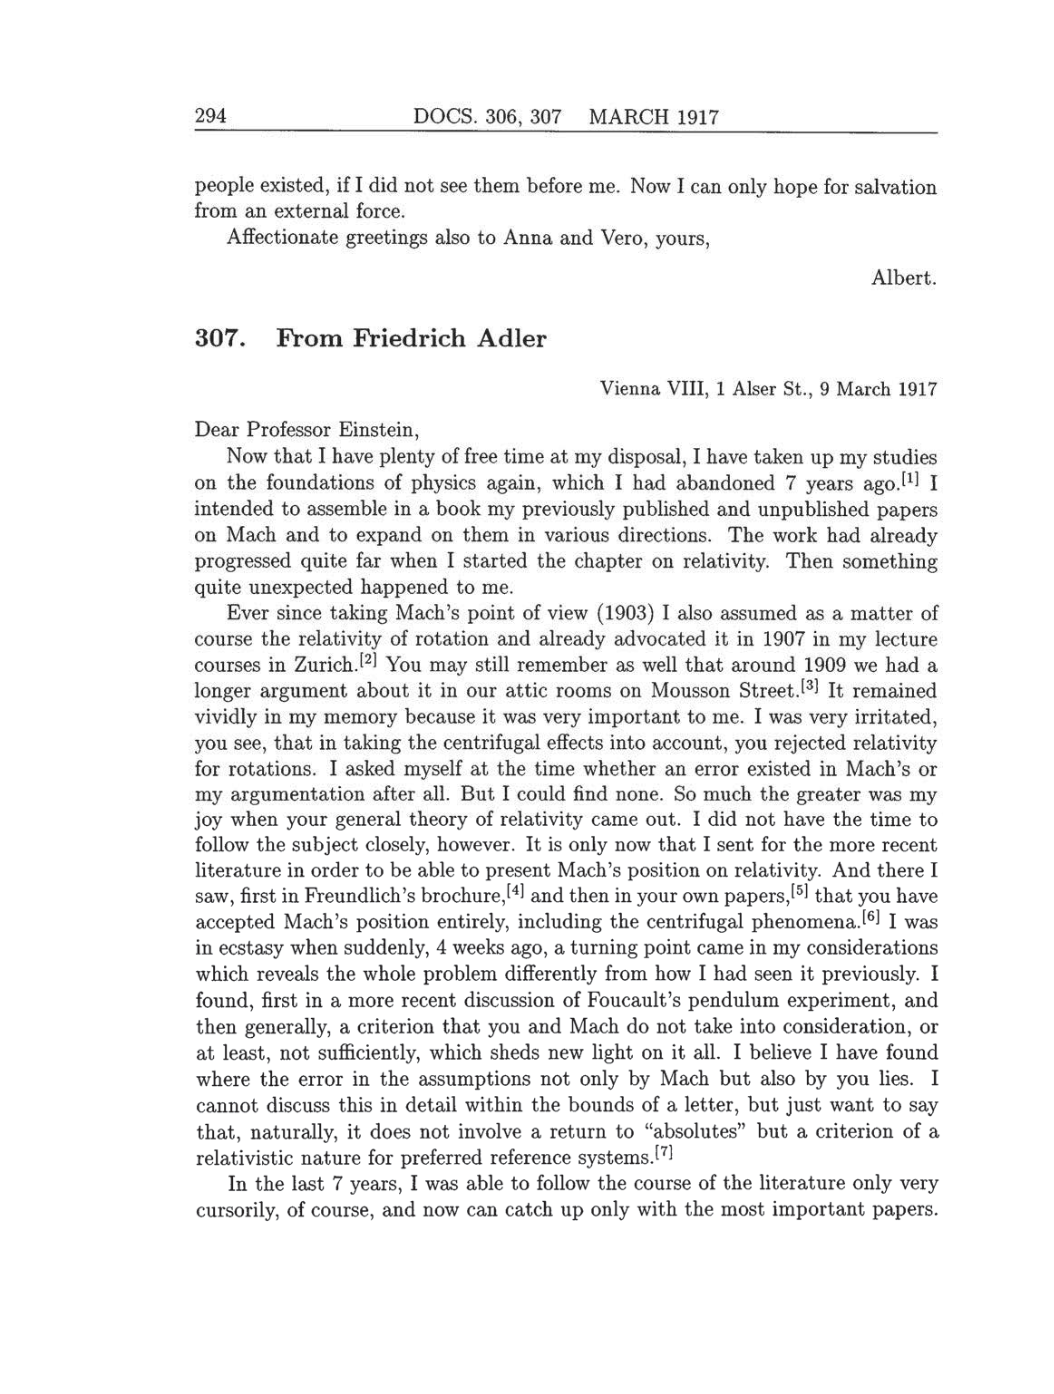 Volume 8: The Berlin Years: Correspondence, 1914-1918 (English translation supplement) page 294